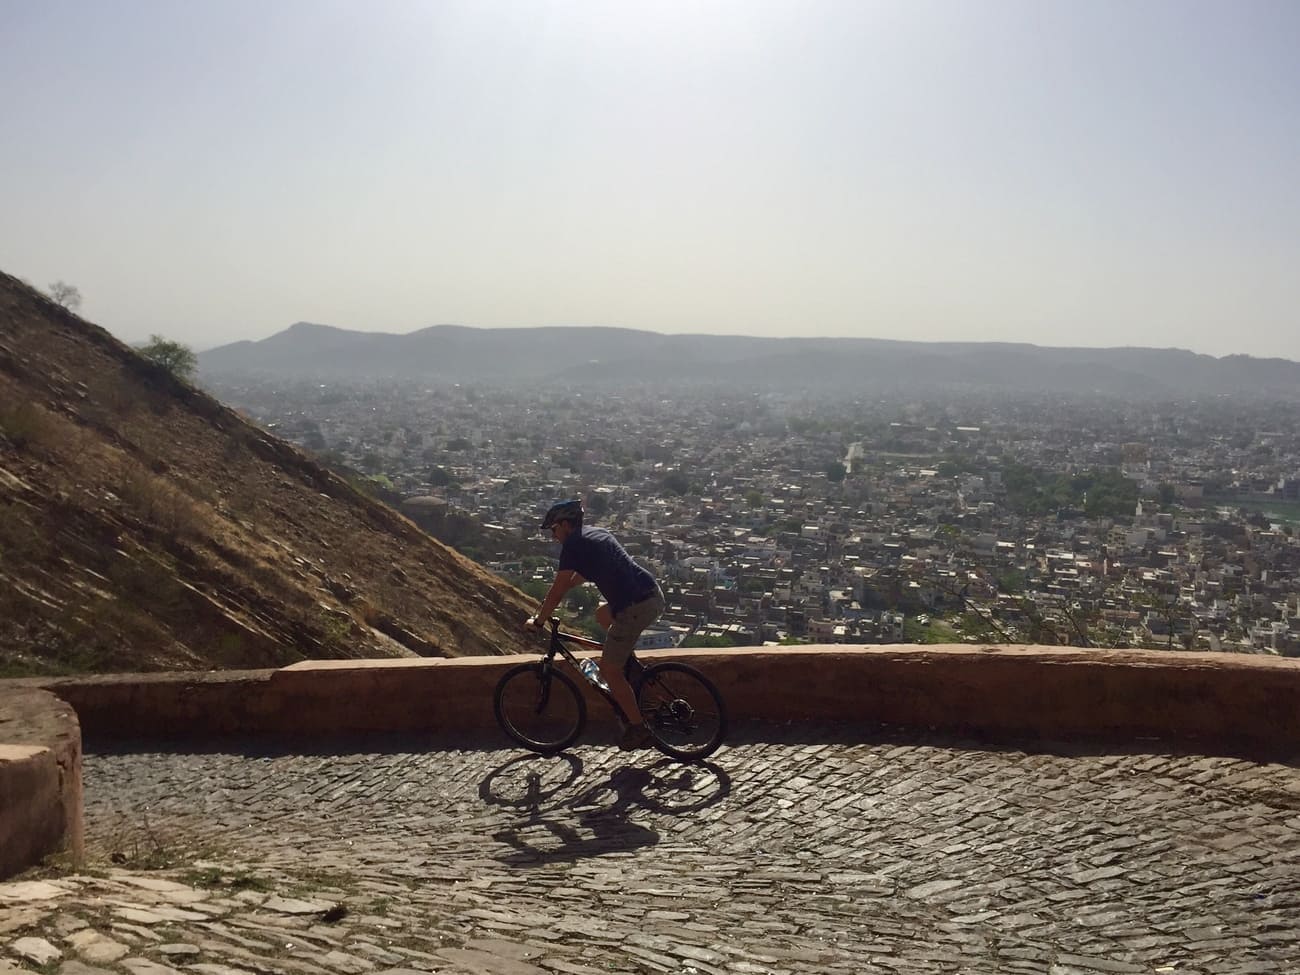 A pleasant cycle ride through the mountains of Nahargarh in Jaipur